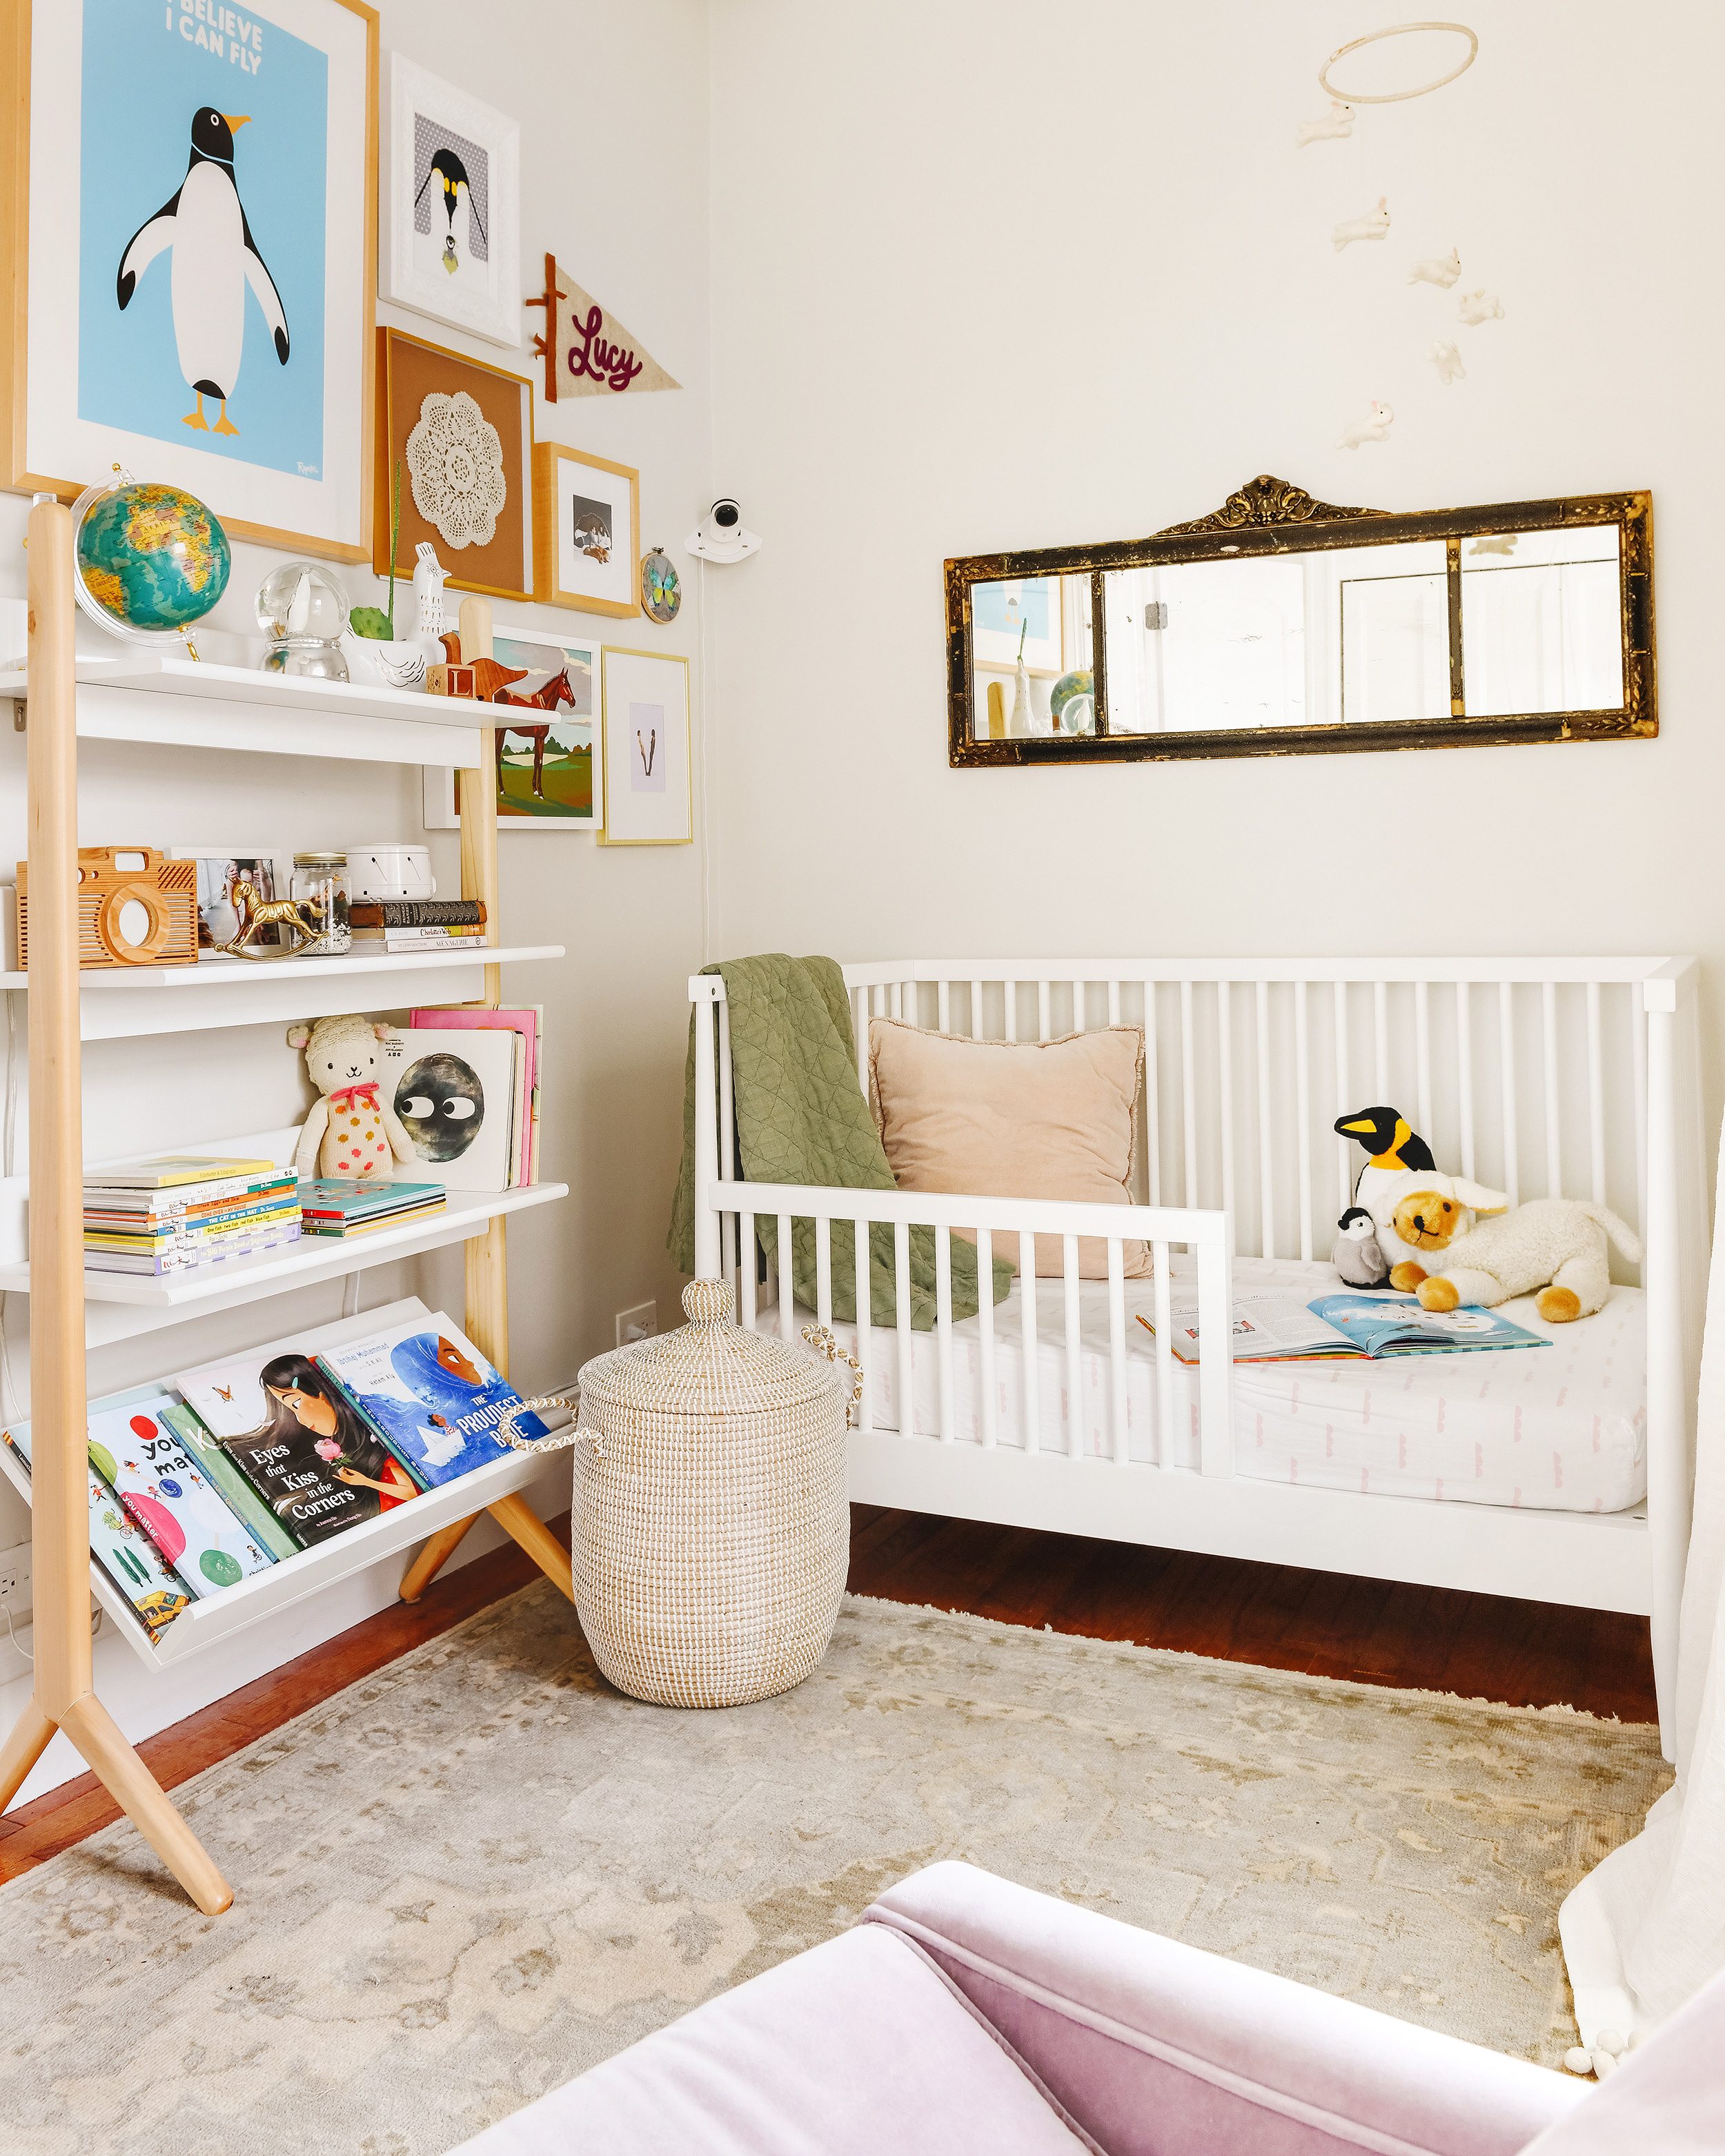 Lucy's nursery and bookshelf! Lucy's diverse library | 23 diverse + inclusive books for kids | via Yellow Brick Home